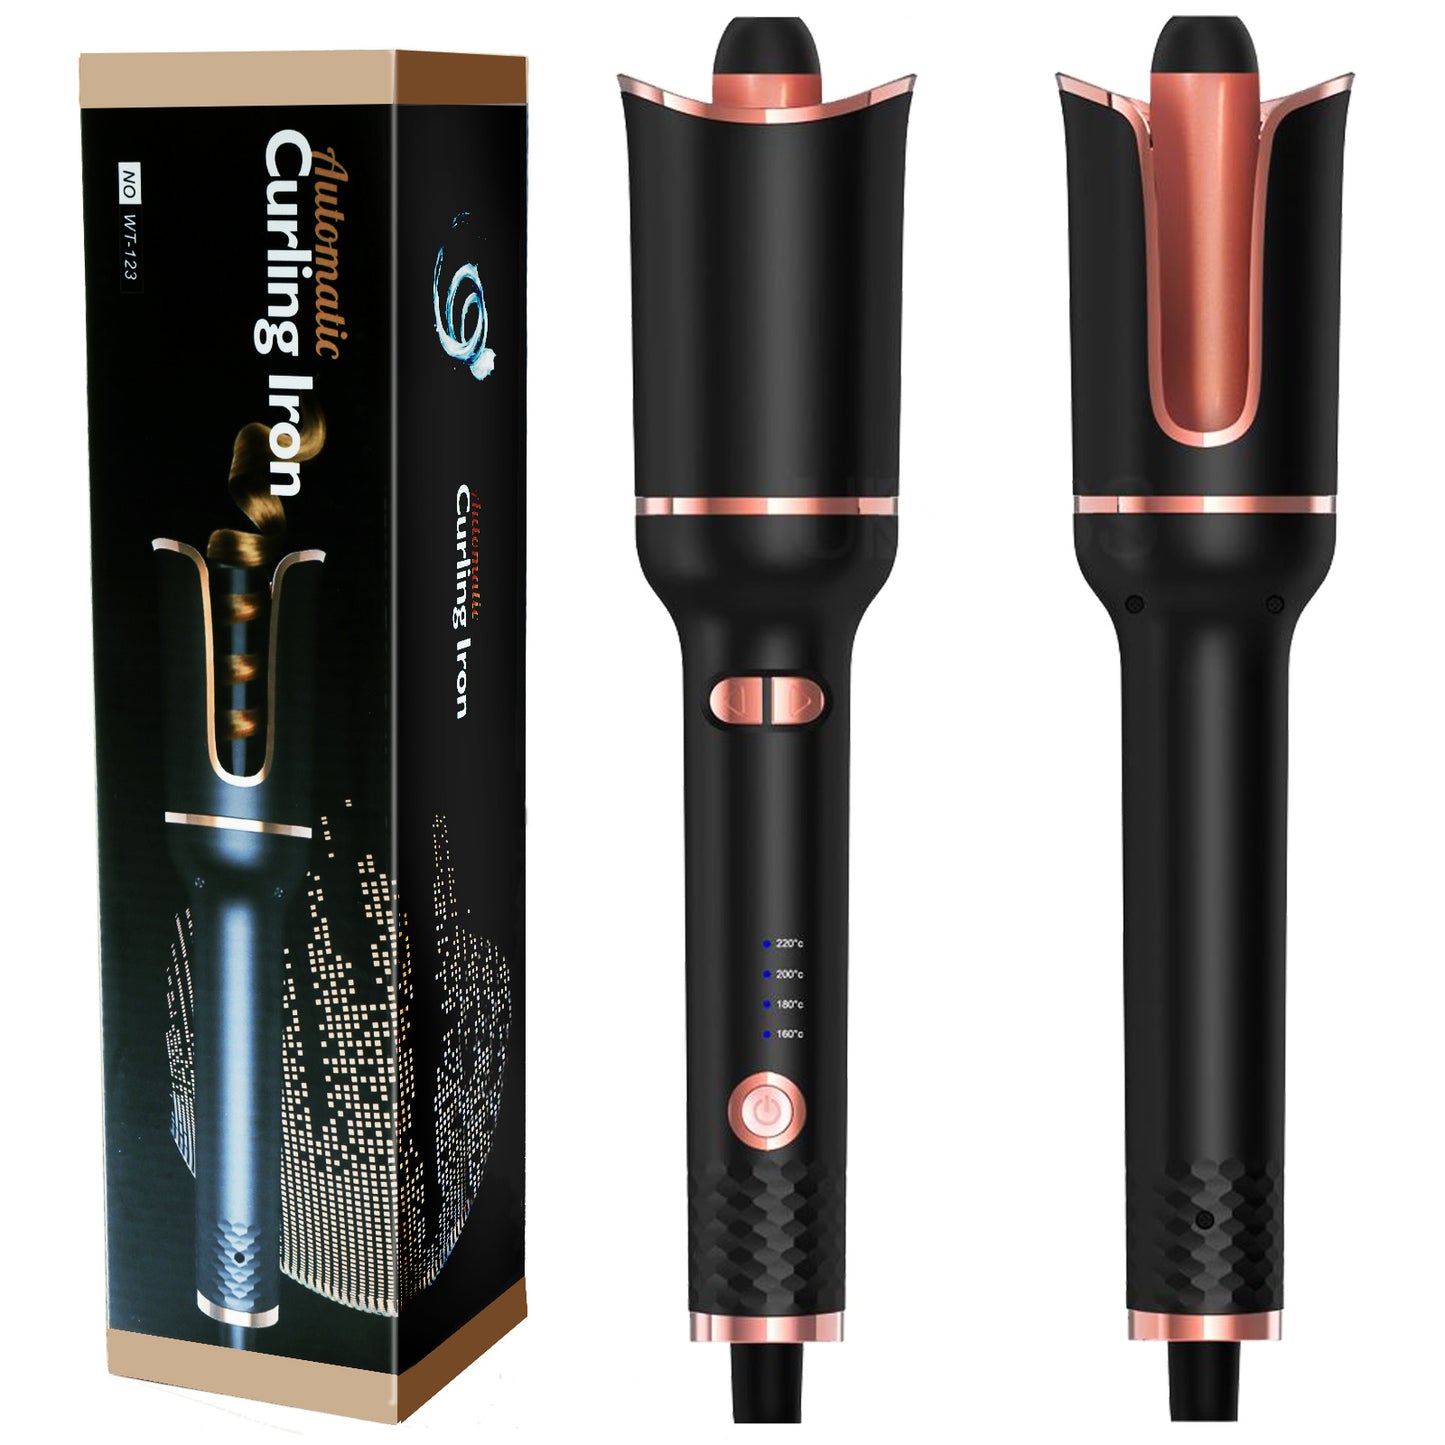 Automatic Hair Curler Ceramic Curling Irons Wand Rotating Curling Wand Electric Hair Waver Styling Tools Auto Hair Crimper